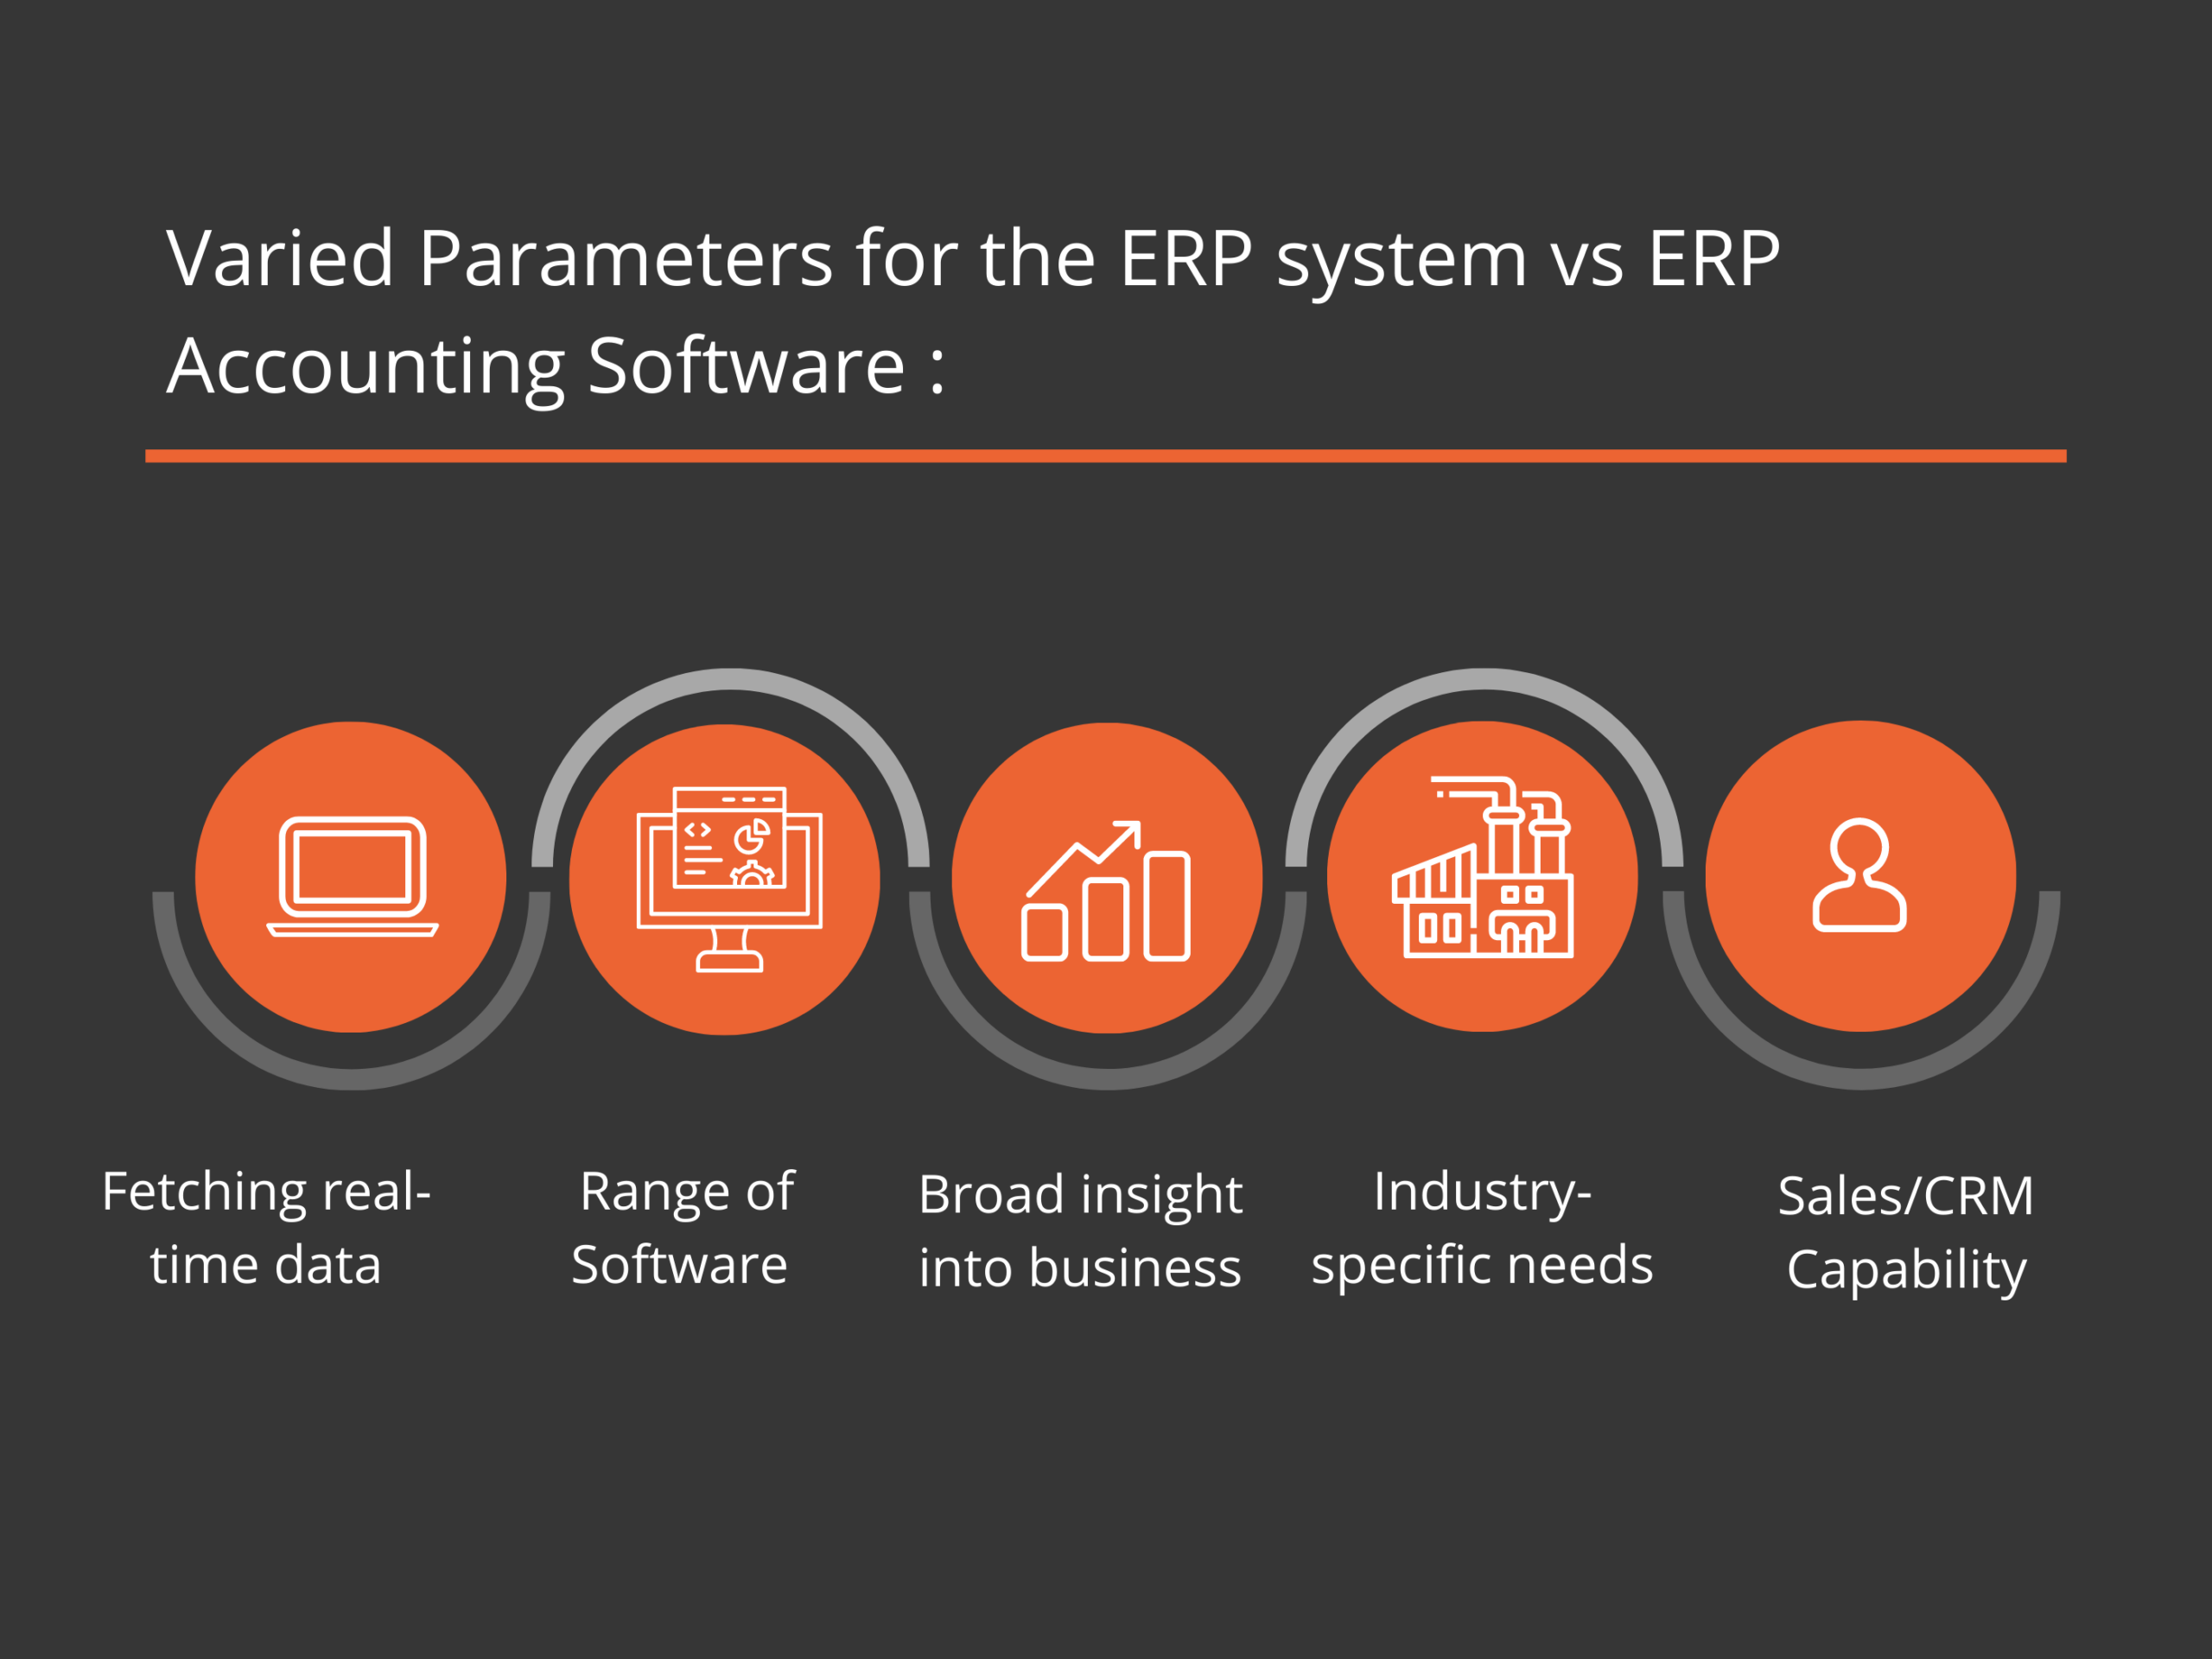 Varied Parameters for the ERP system vs ERP Accounting Software